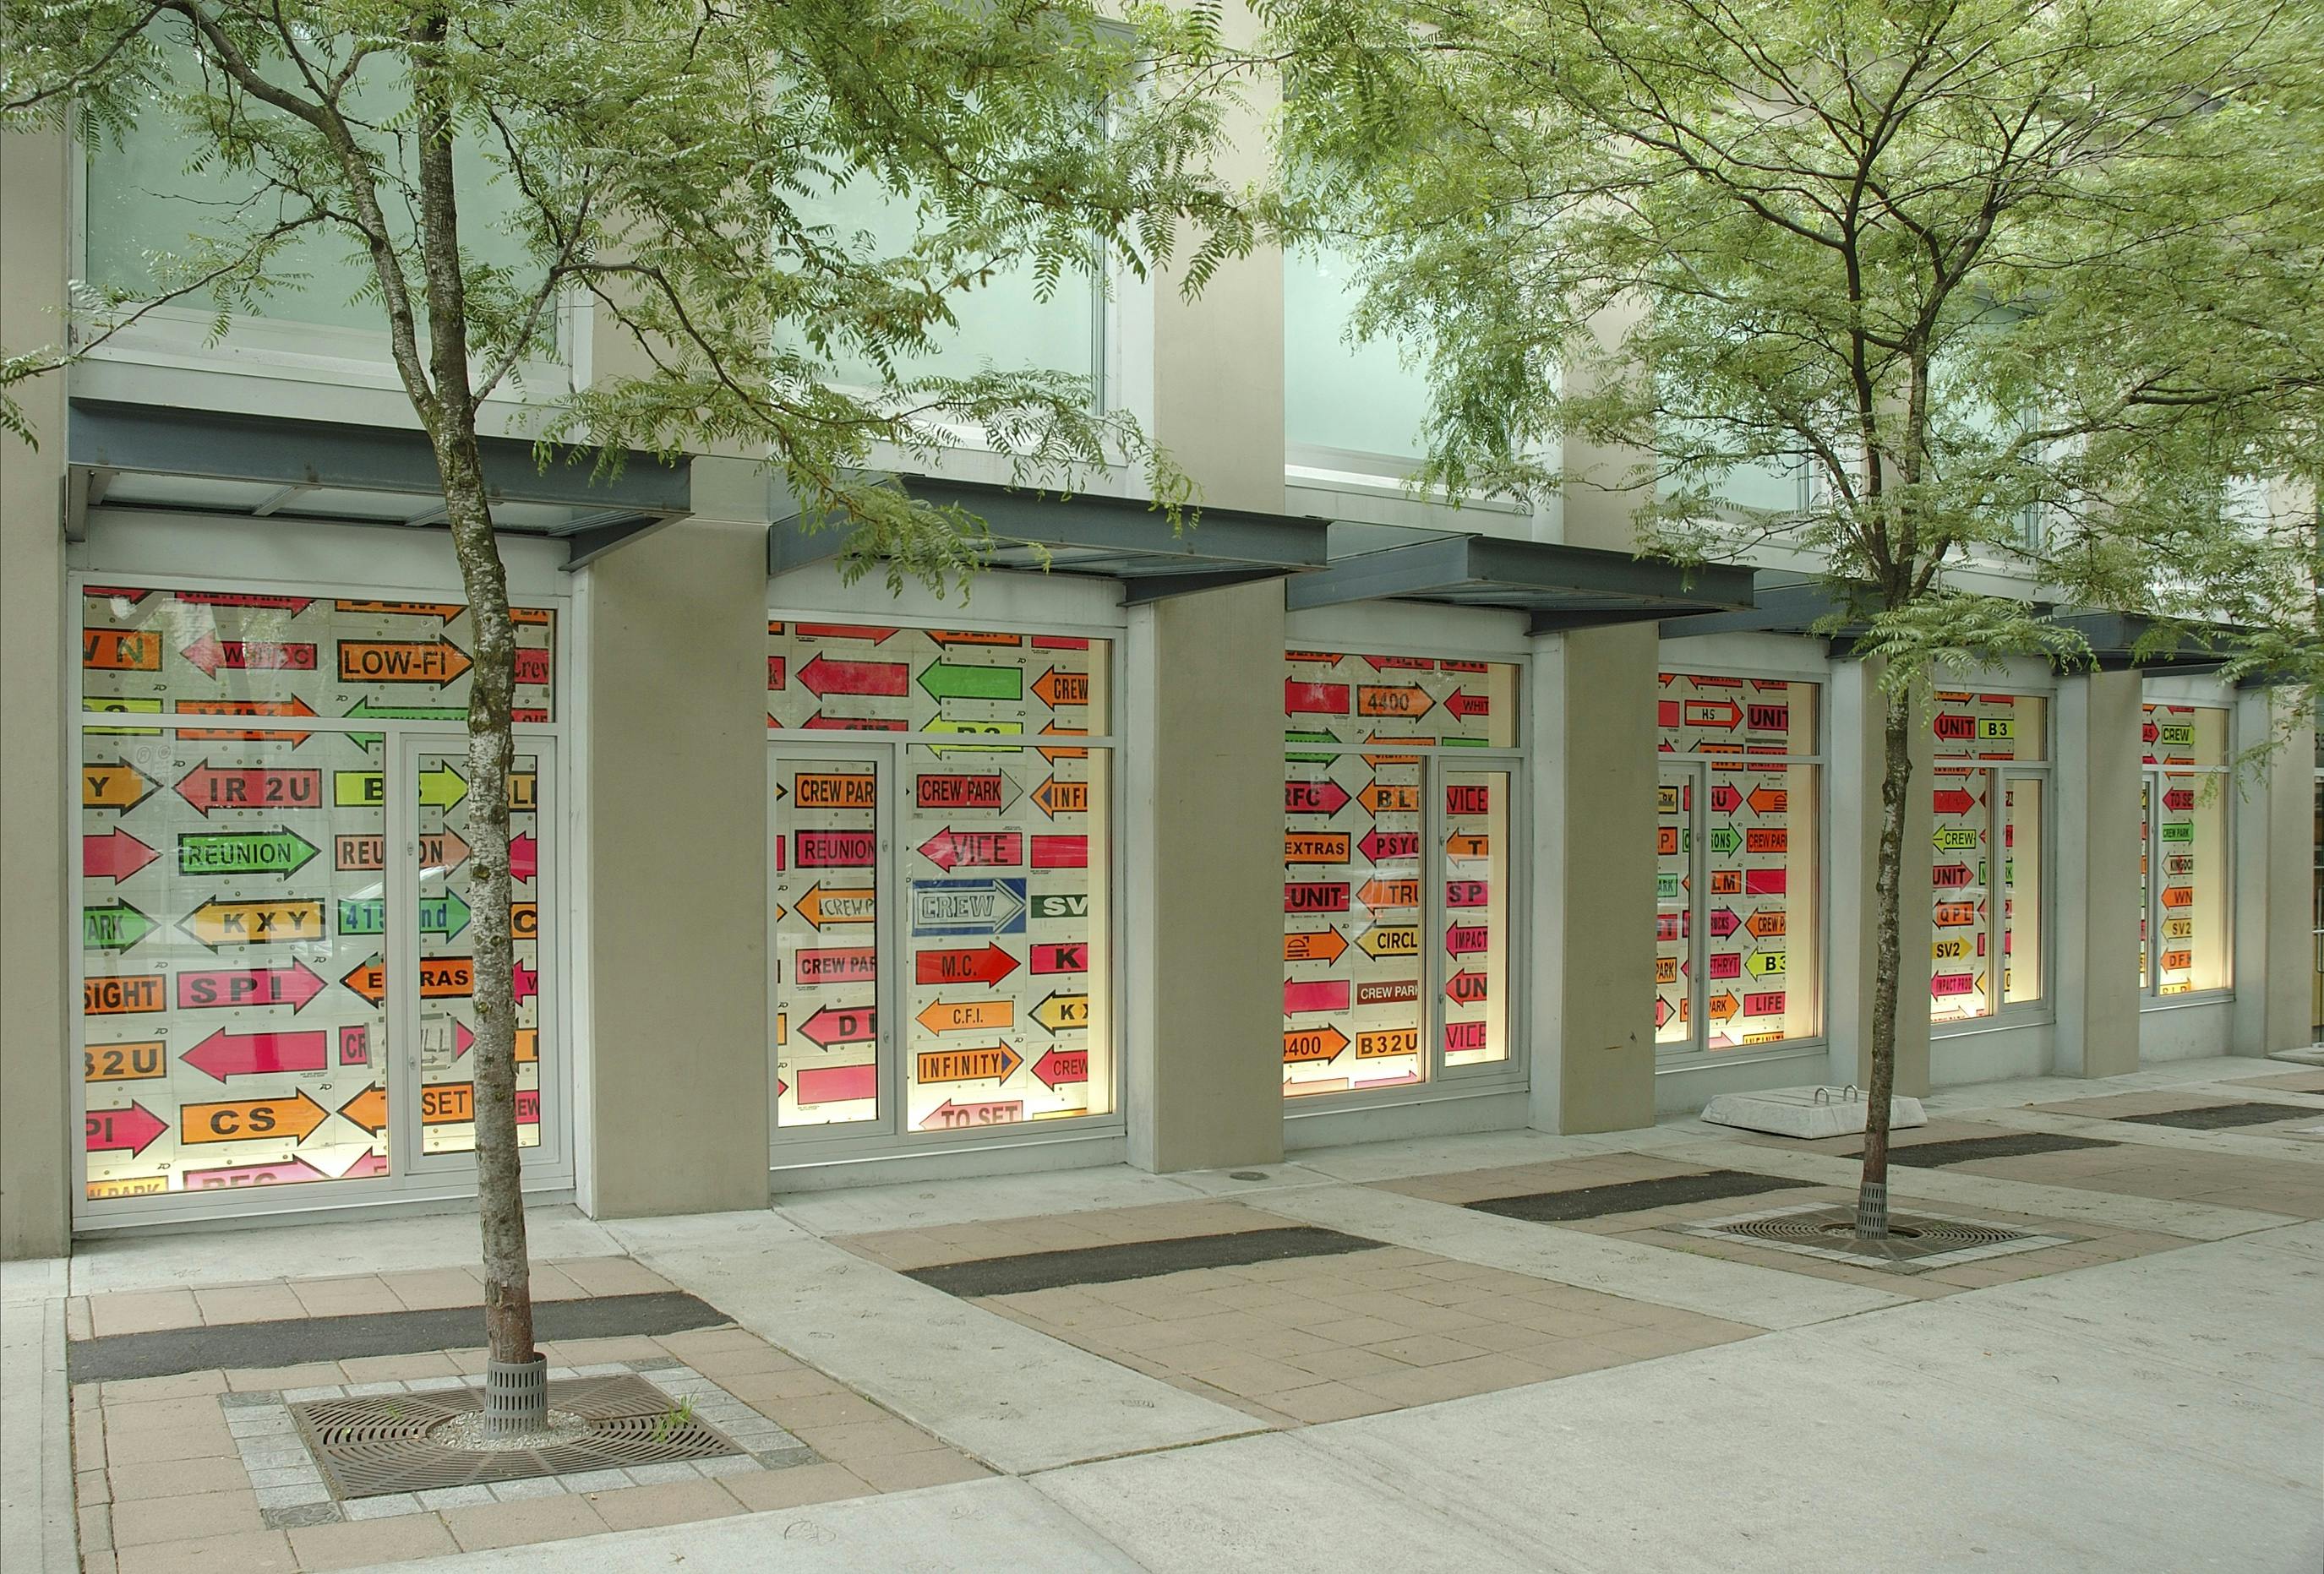 Neon-coloured signs cover the entire windows on the CAG’s facade. All the signs mimic the enlarged allow-shaped sticky notes with some words printed on them. Arrows point either to the left or right.